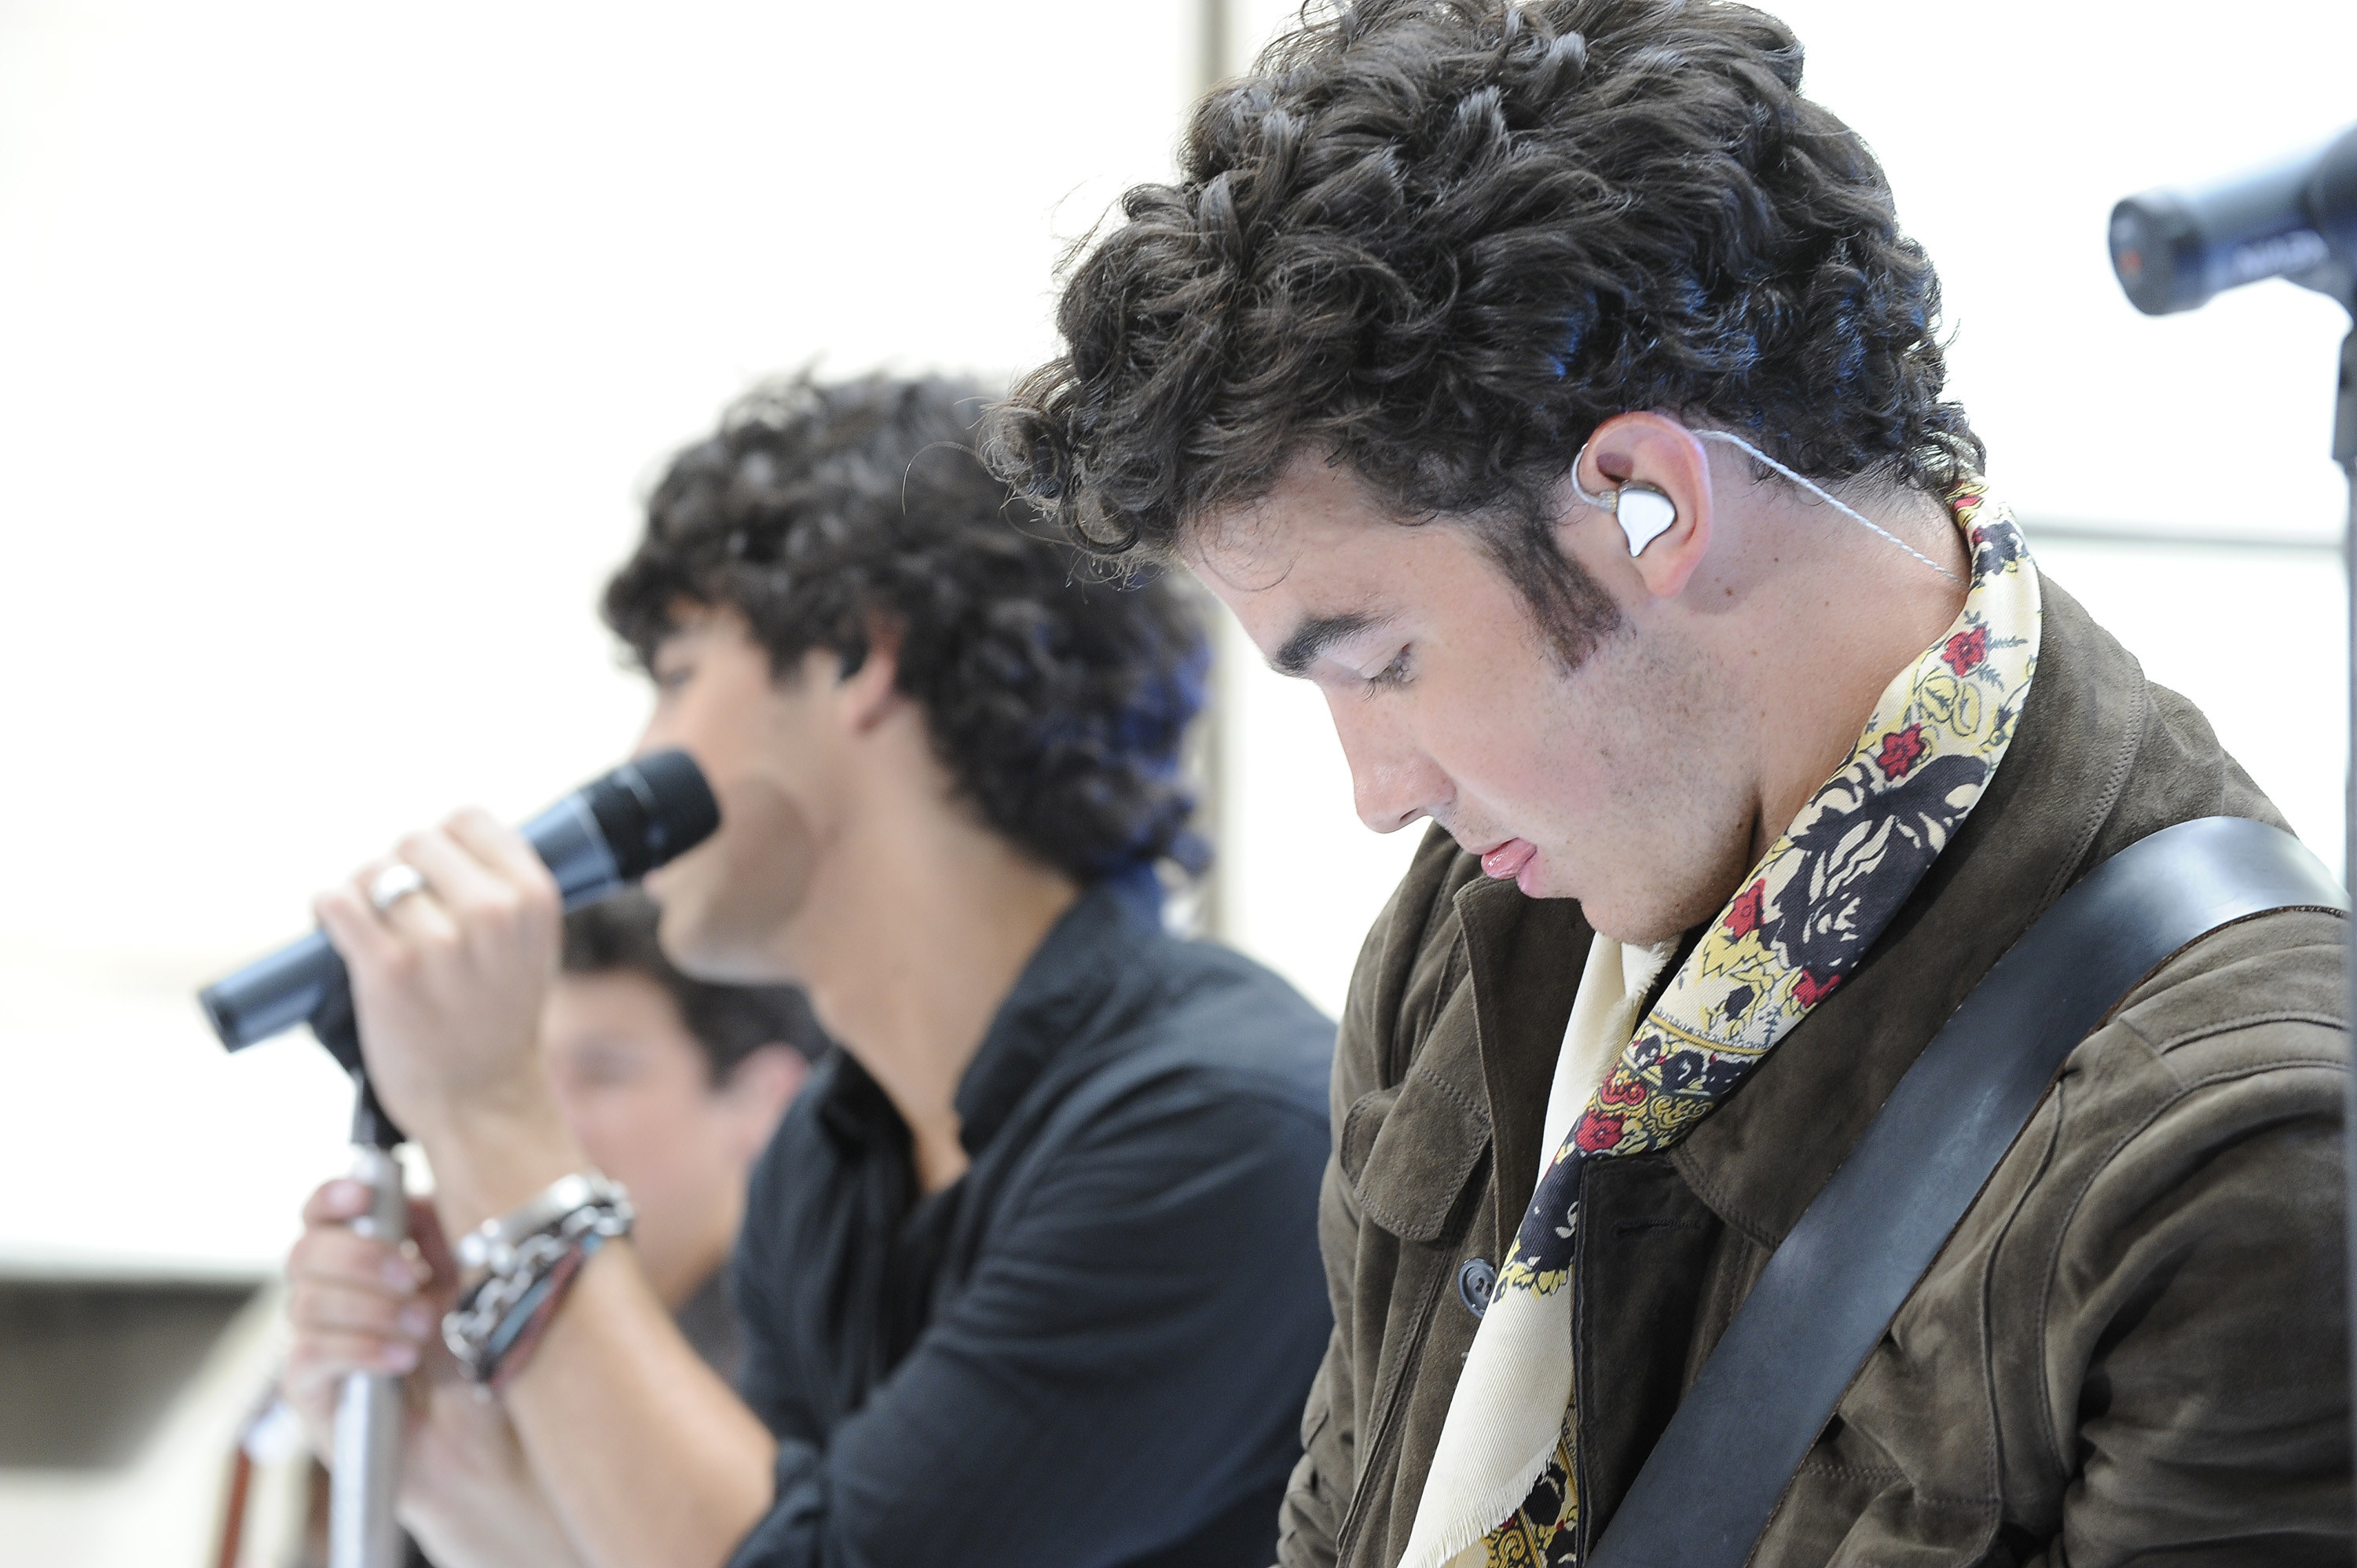 The brothers performing in profile